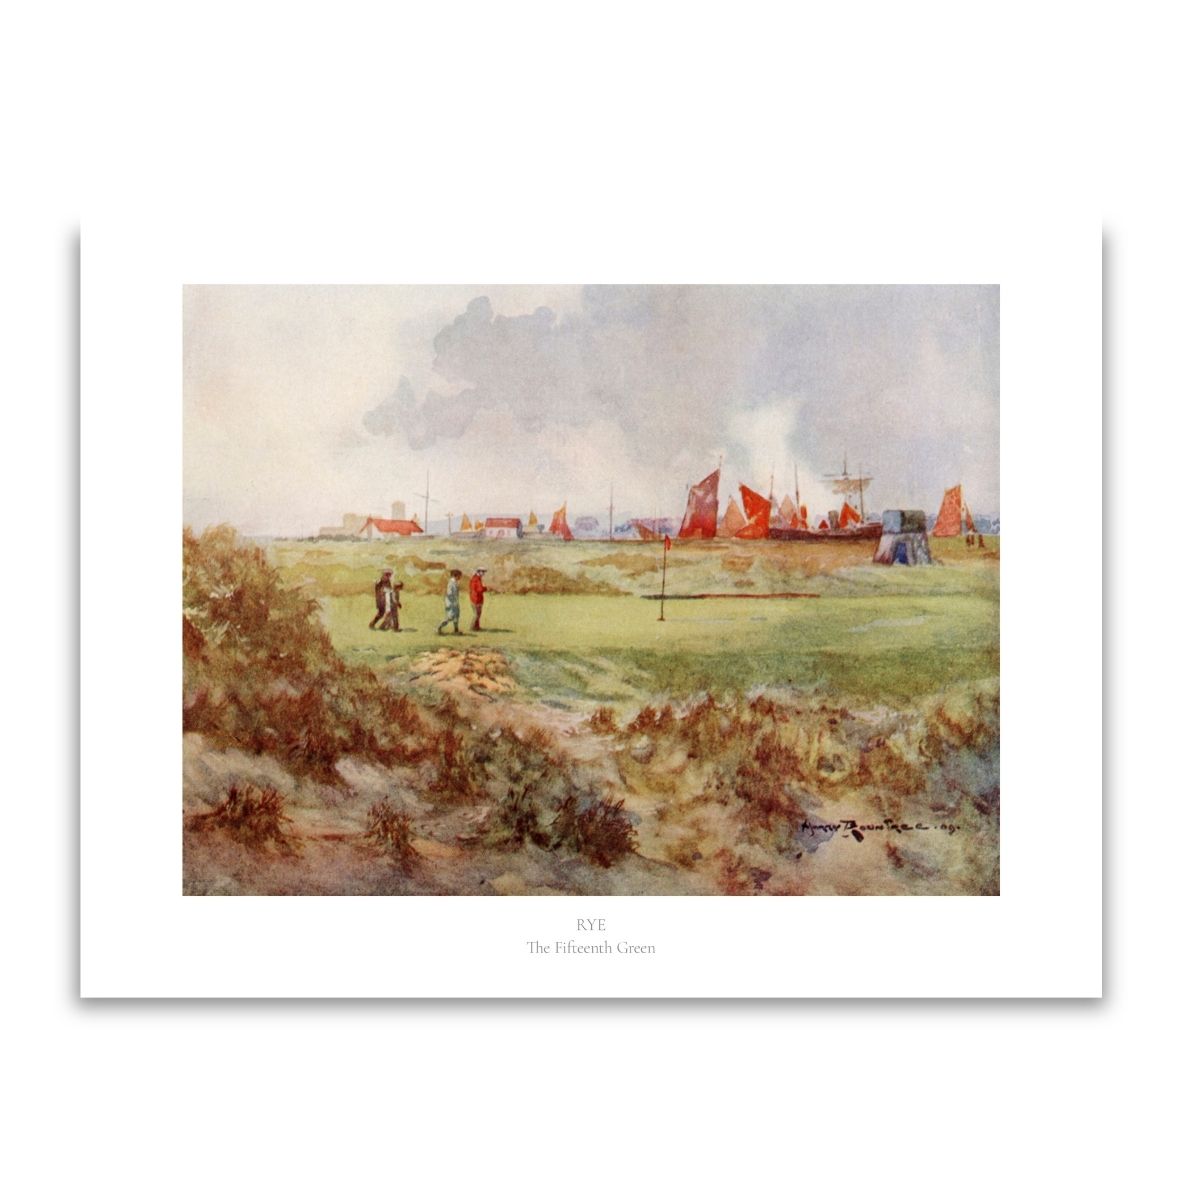 Rye Golf Club print with text by Harry Rountree